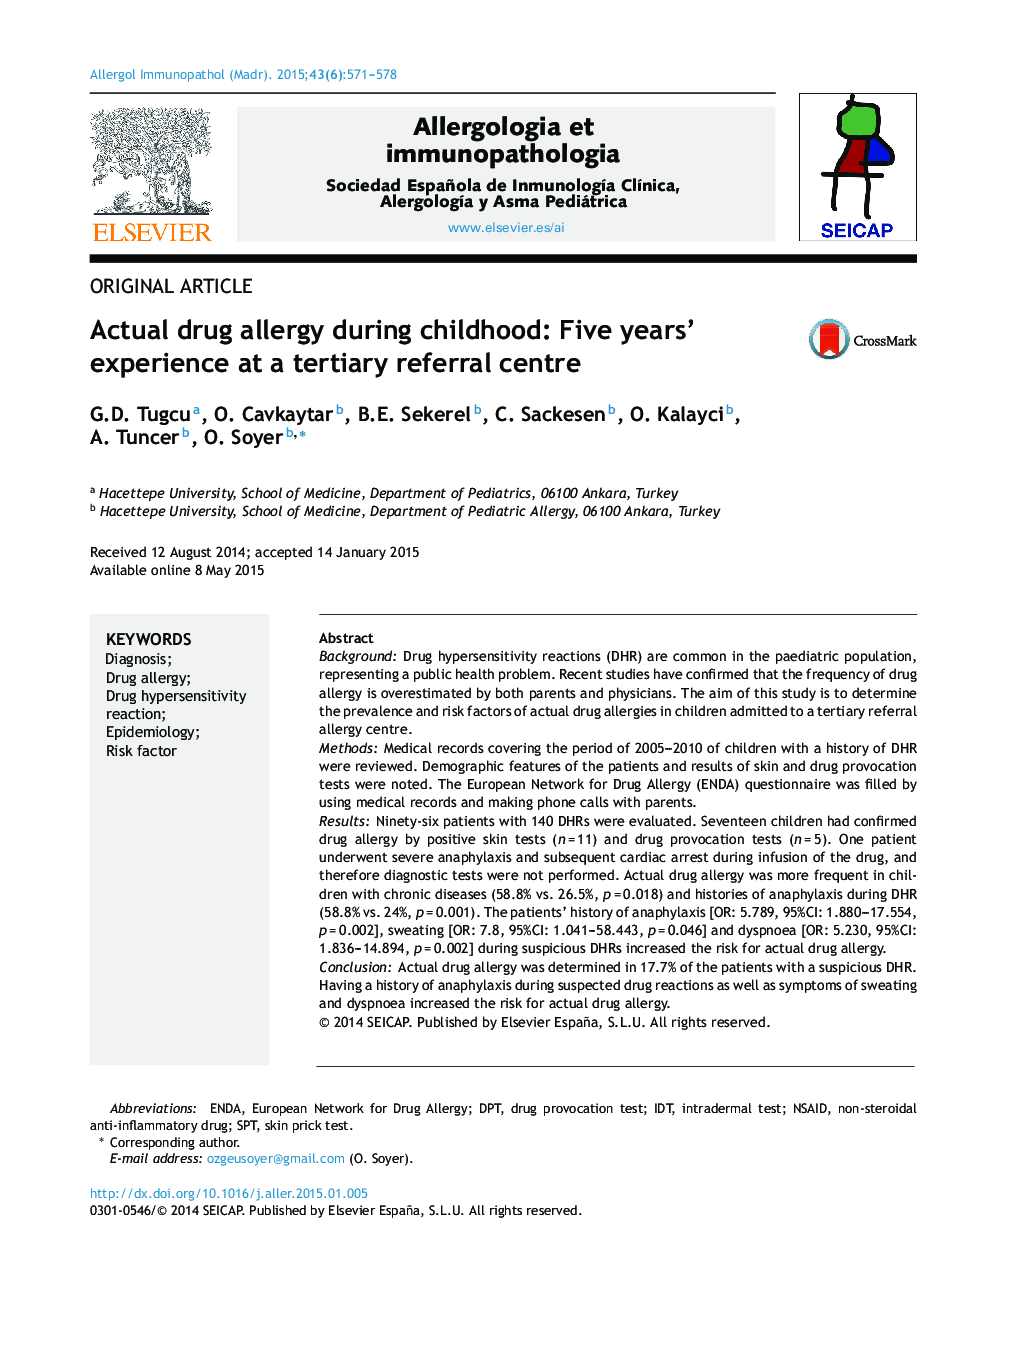 Actual drug allergy during childhood: Five years’ experience at a tertiary referral centre